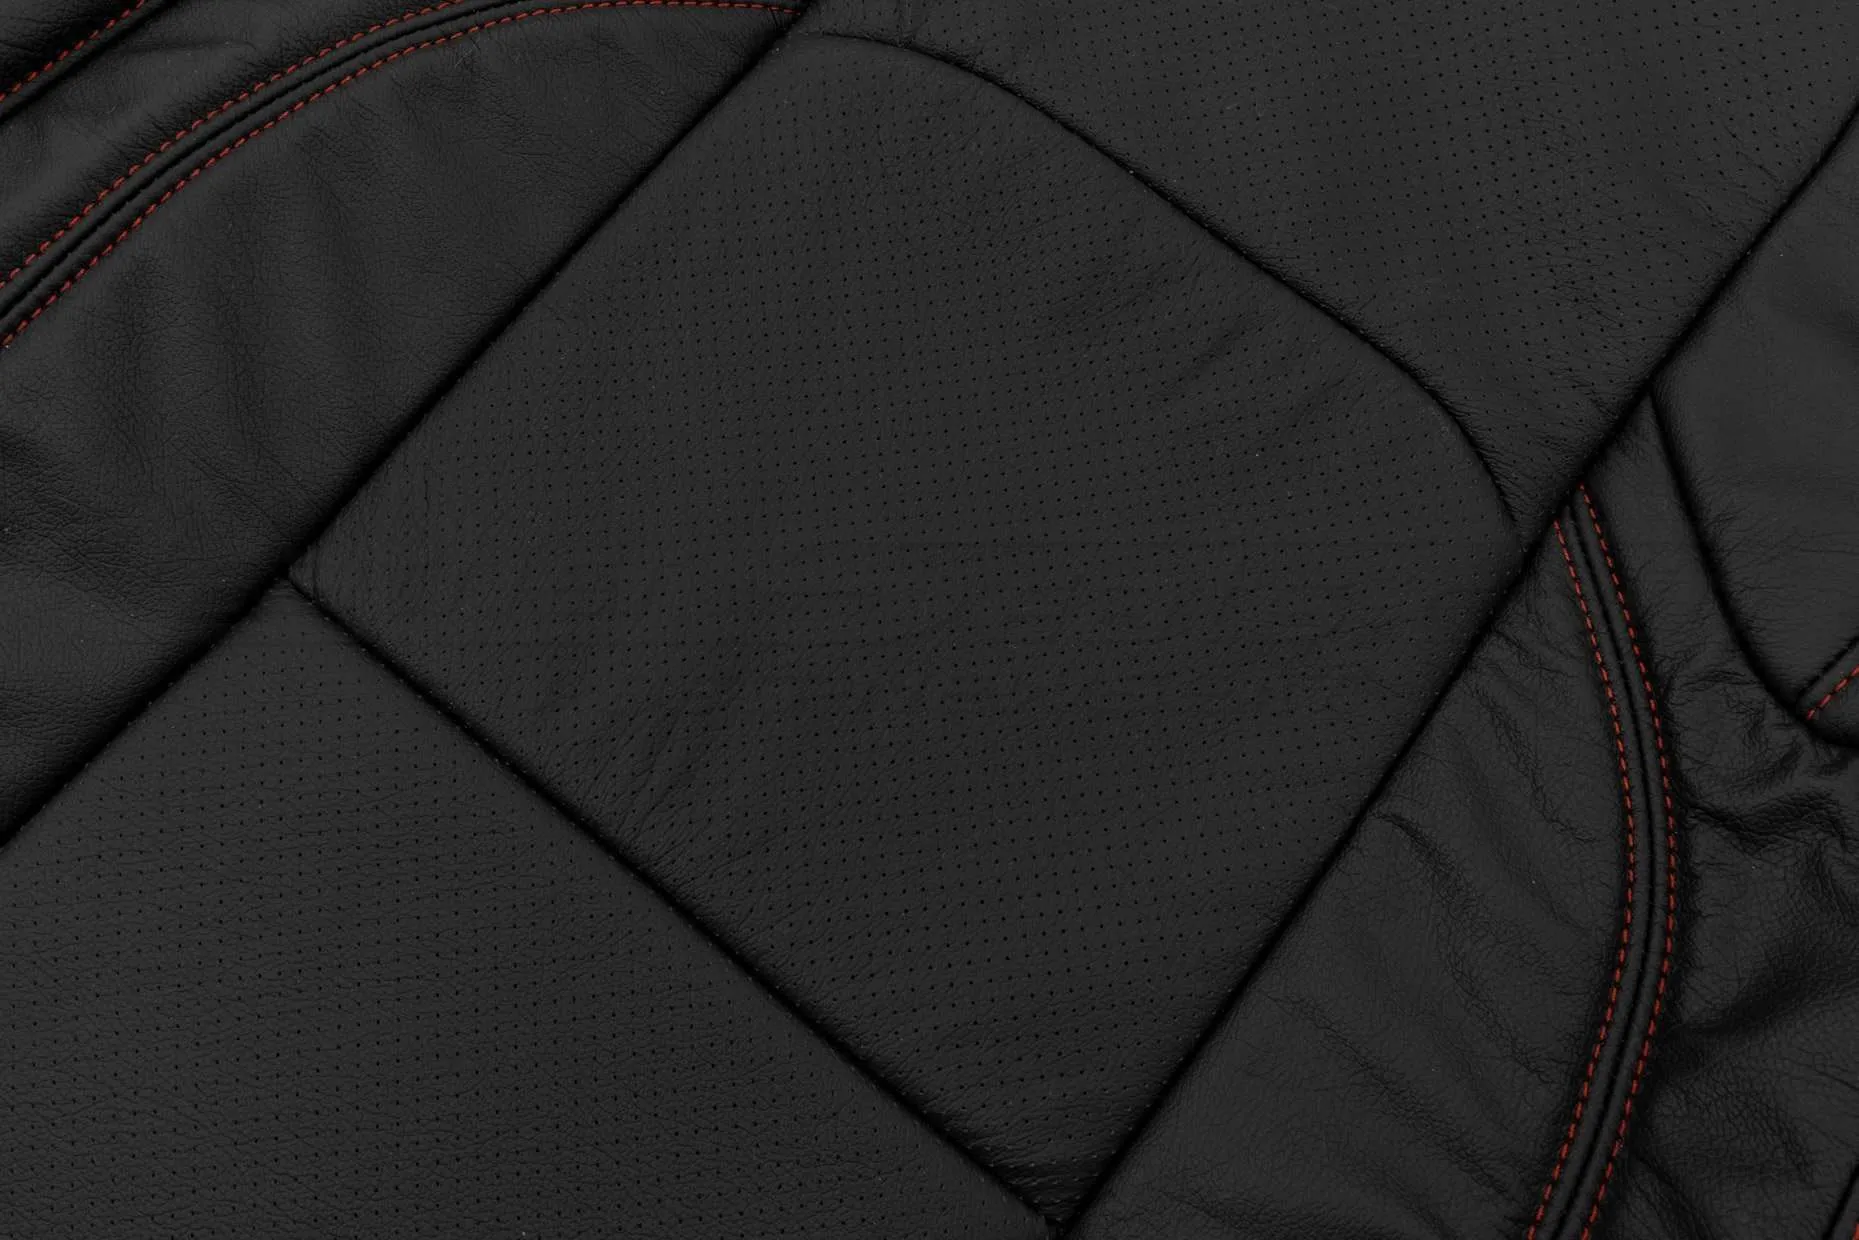 Perforated Body section of backrest